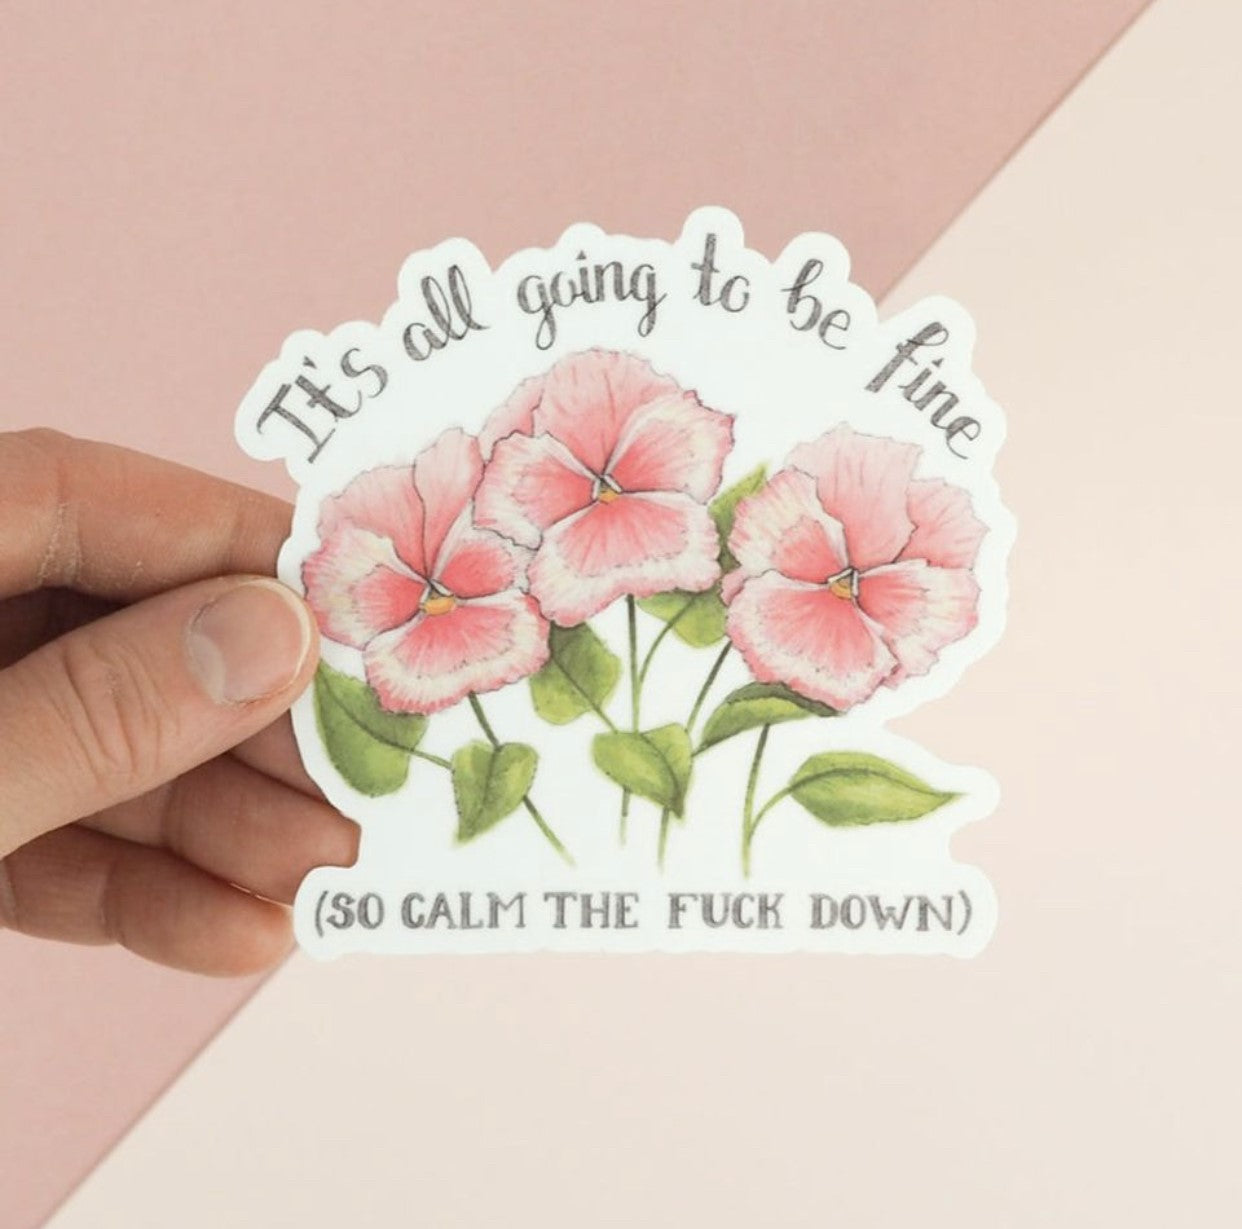 It's All Going To Be Fine (So calm the fuck down) Sticker